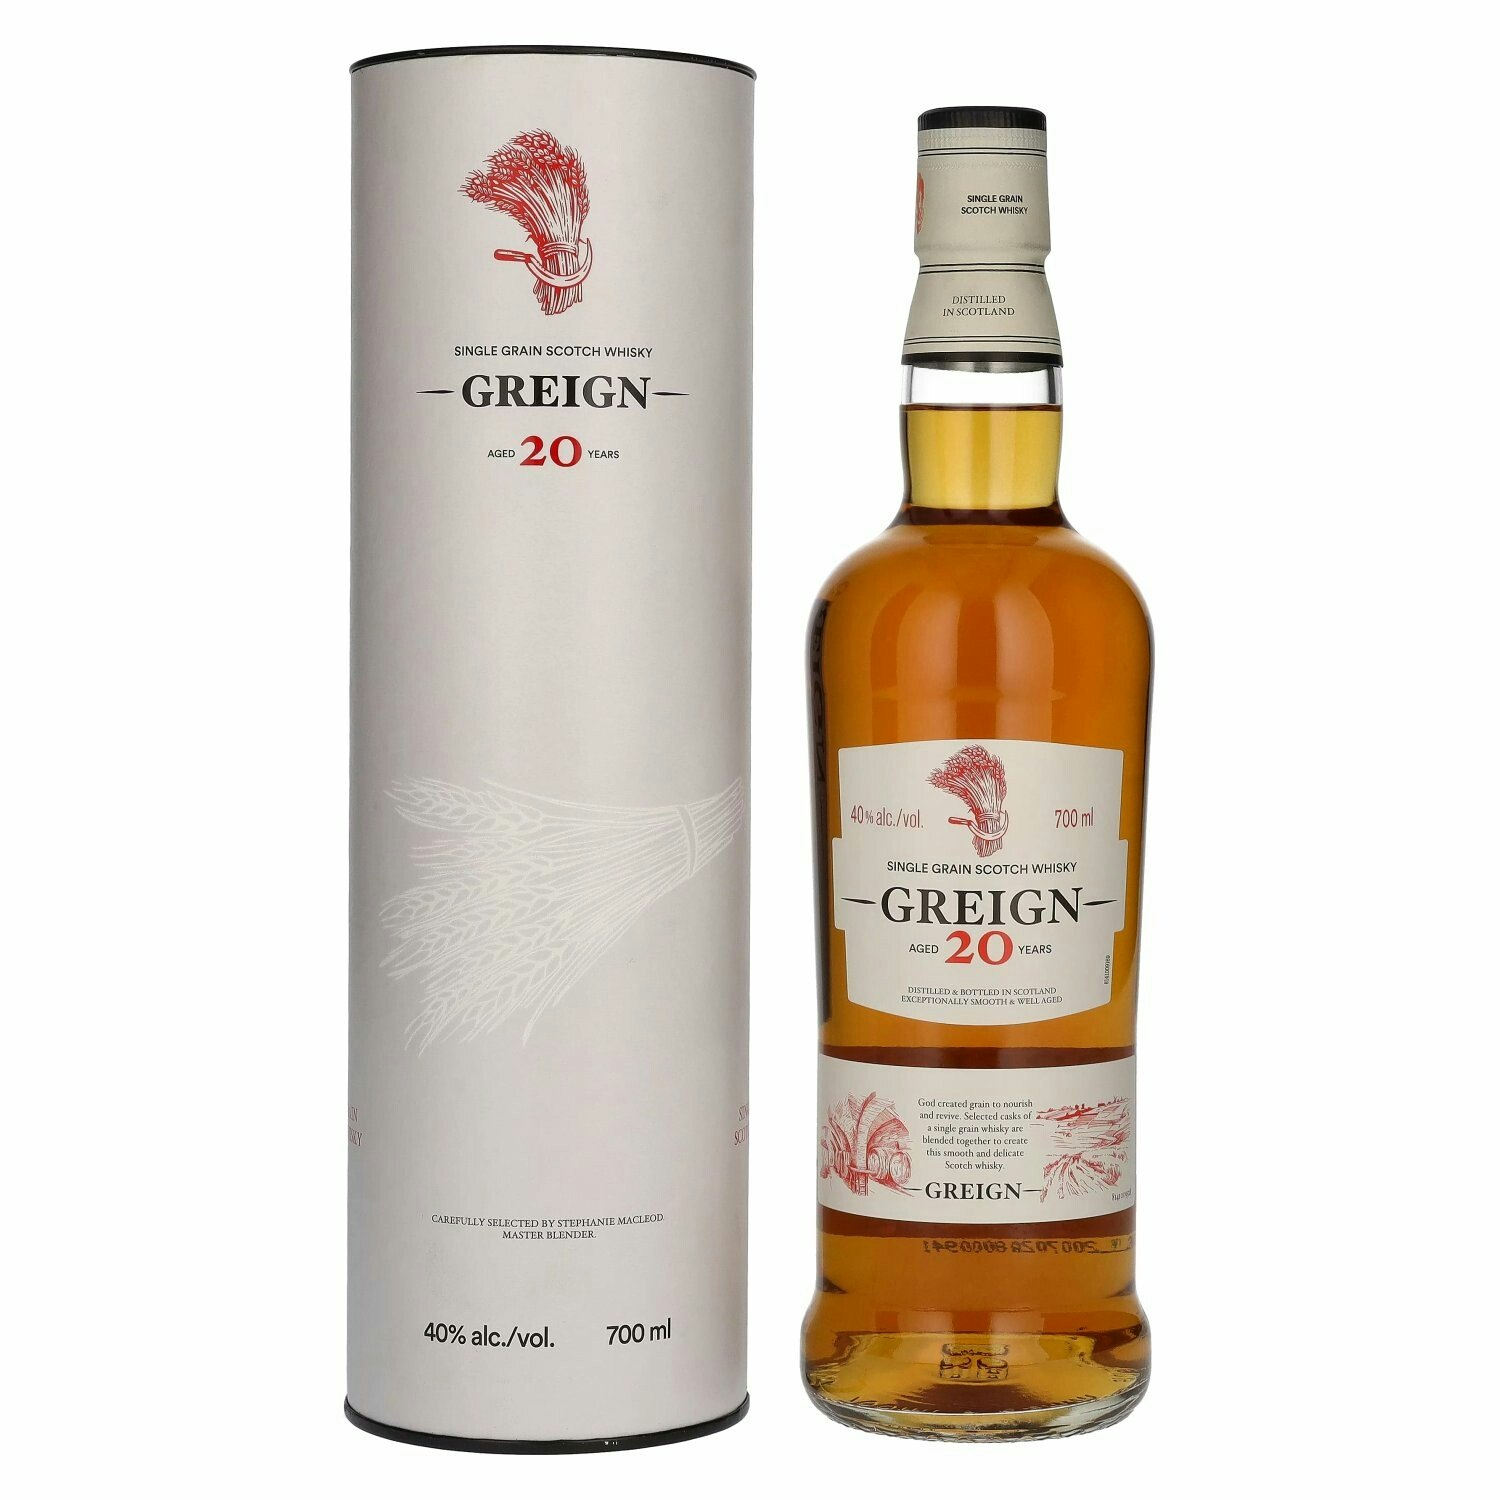 Greign 20 Years Old Single Grain Scotch Whisky 40% Vol. 0,7l in Giftbox